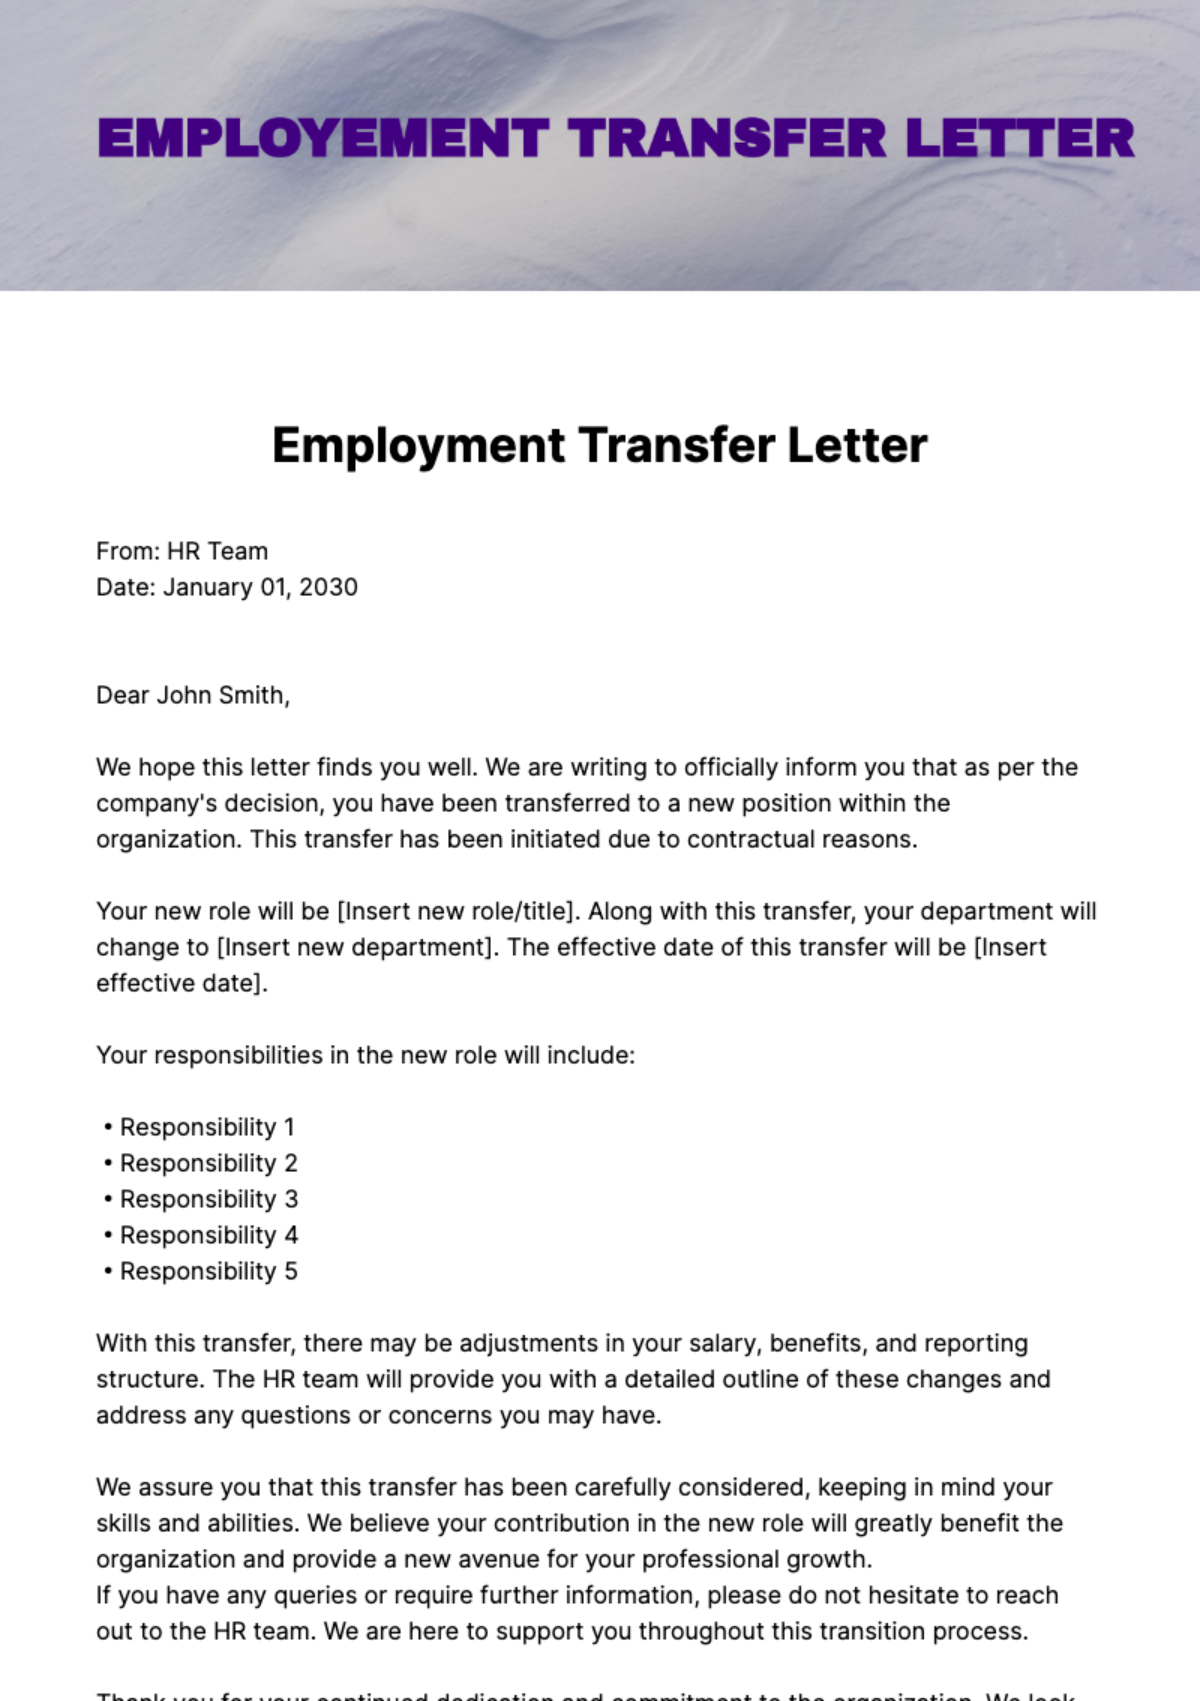 Free Employment Transfer Letter Template